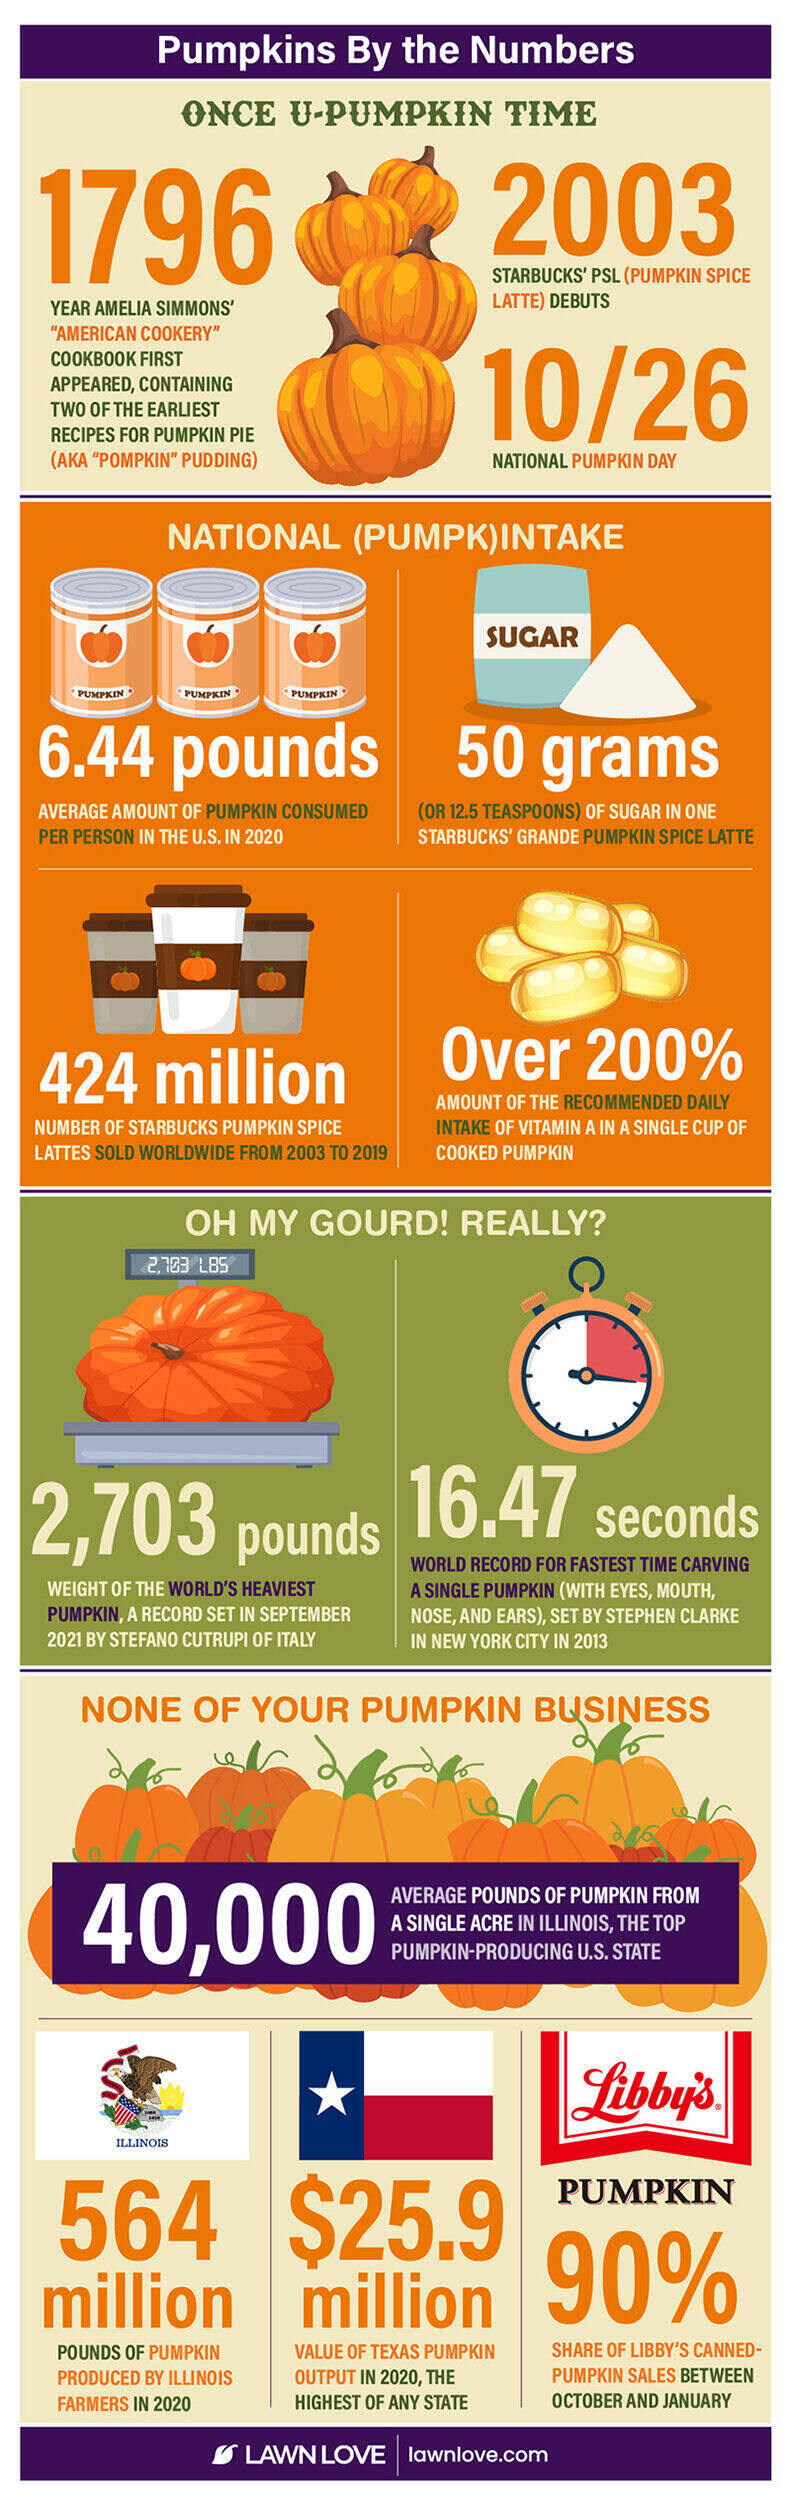 infographic depicting pumpkins by the numbers